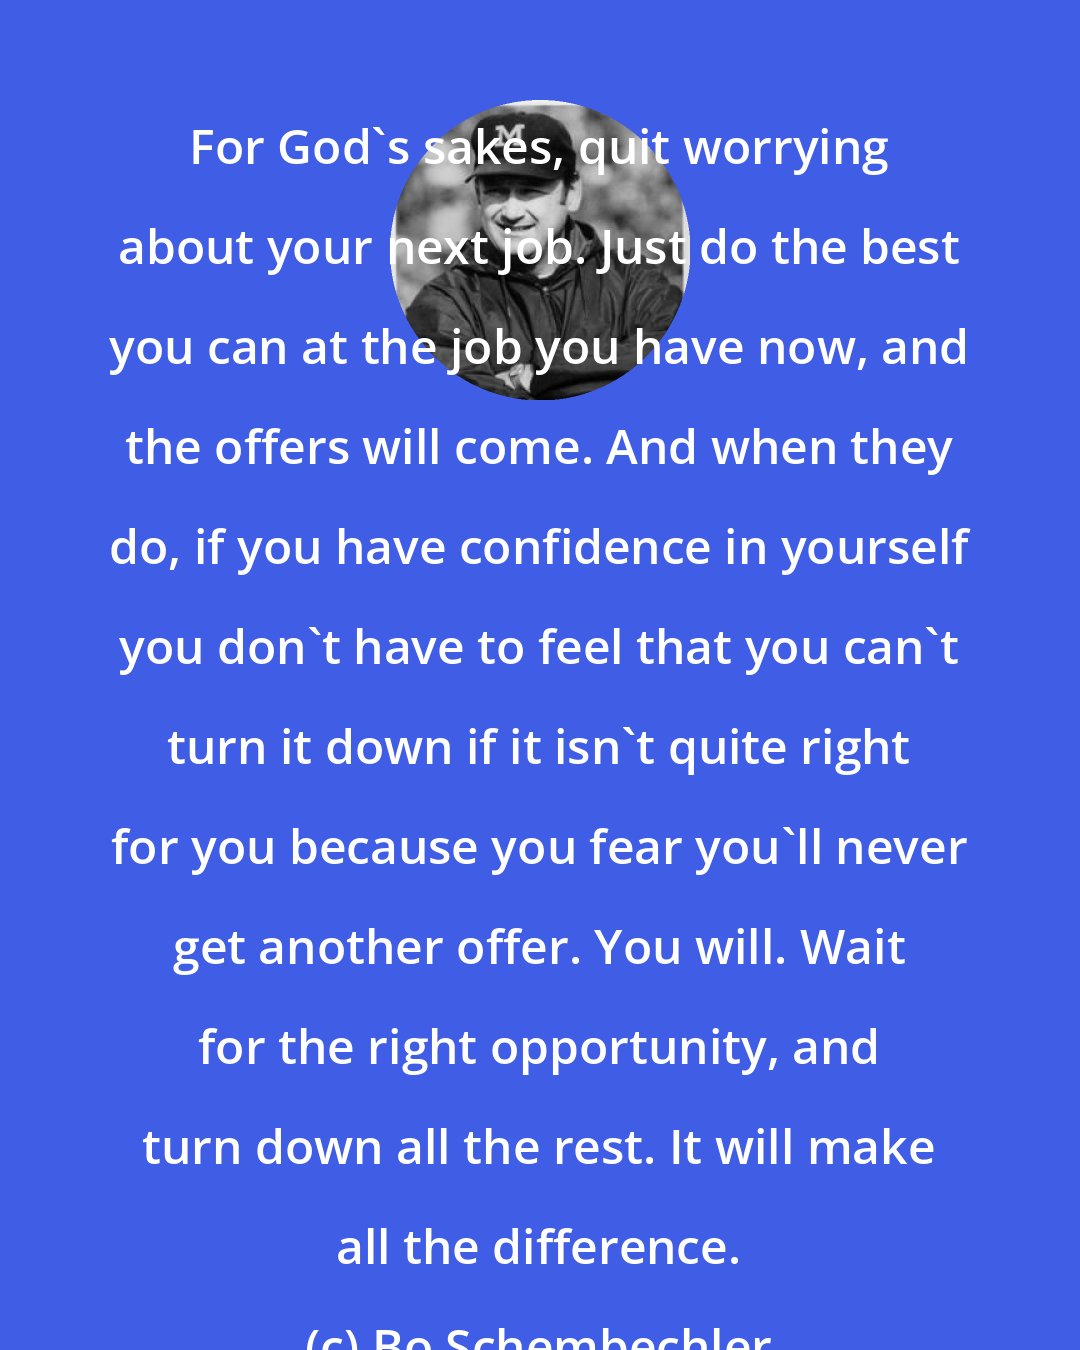 Bo Schembechler: For God's sakes, quit worrying about your next job. Just do the best you can at the job you have now, and the offers will come. And when they do, if you have confidence in yourself you don't have to feel that you can't turn it down if it isn't quite right for you because you fear you'll never get another offer. You will. Wait for the right opportunity, and turn down all the rest. It will make all the difference.